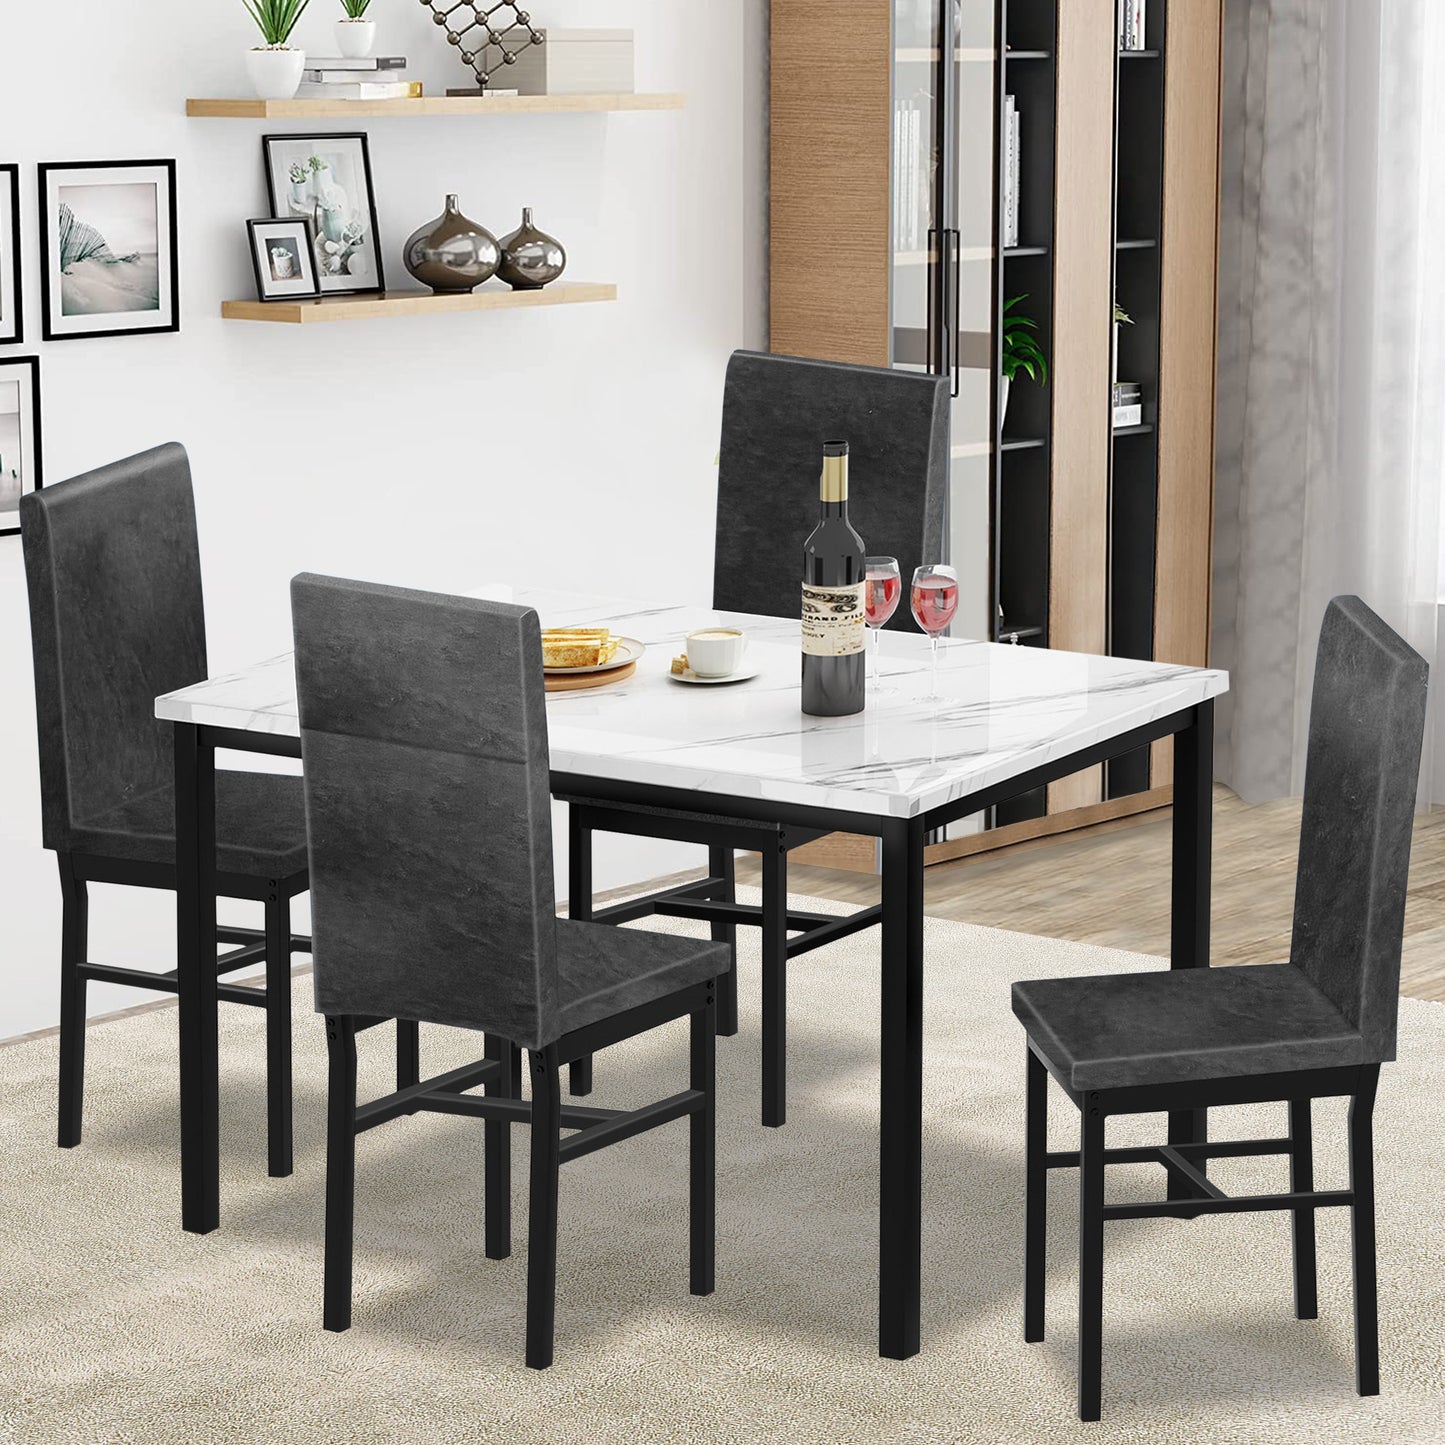 Modern Dining Table Set for 4, SYNGAR Faux Marble Table and PU Leather Upholstered Chairs Set, 5 Piece Kitchen Dining Set, Dining Table and Chairs Set for Small Space, Breakfast Nook, White, D8528